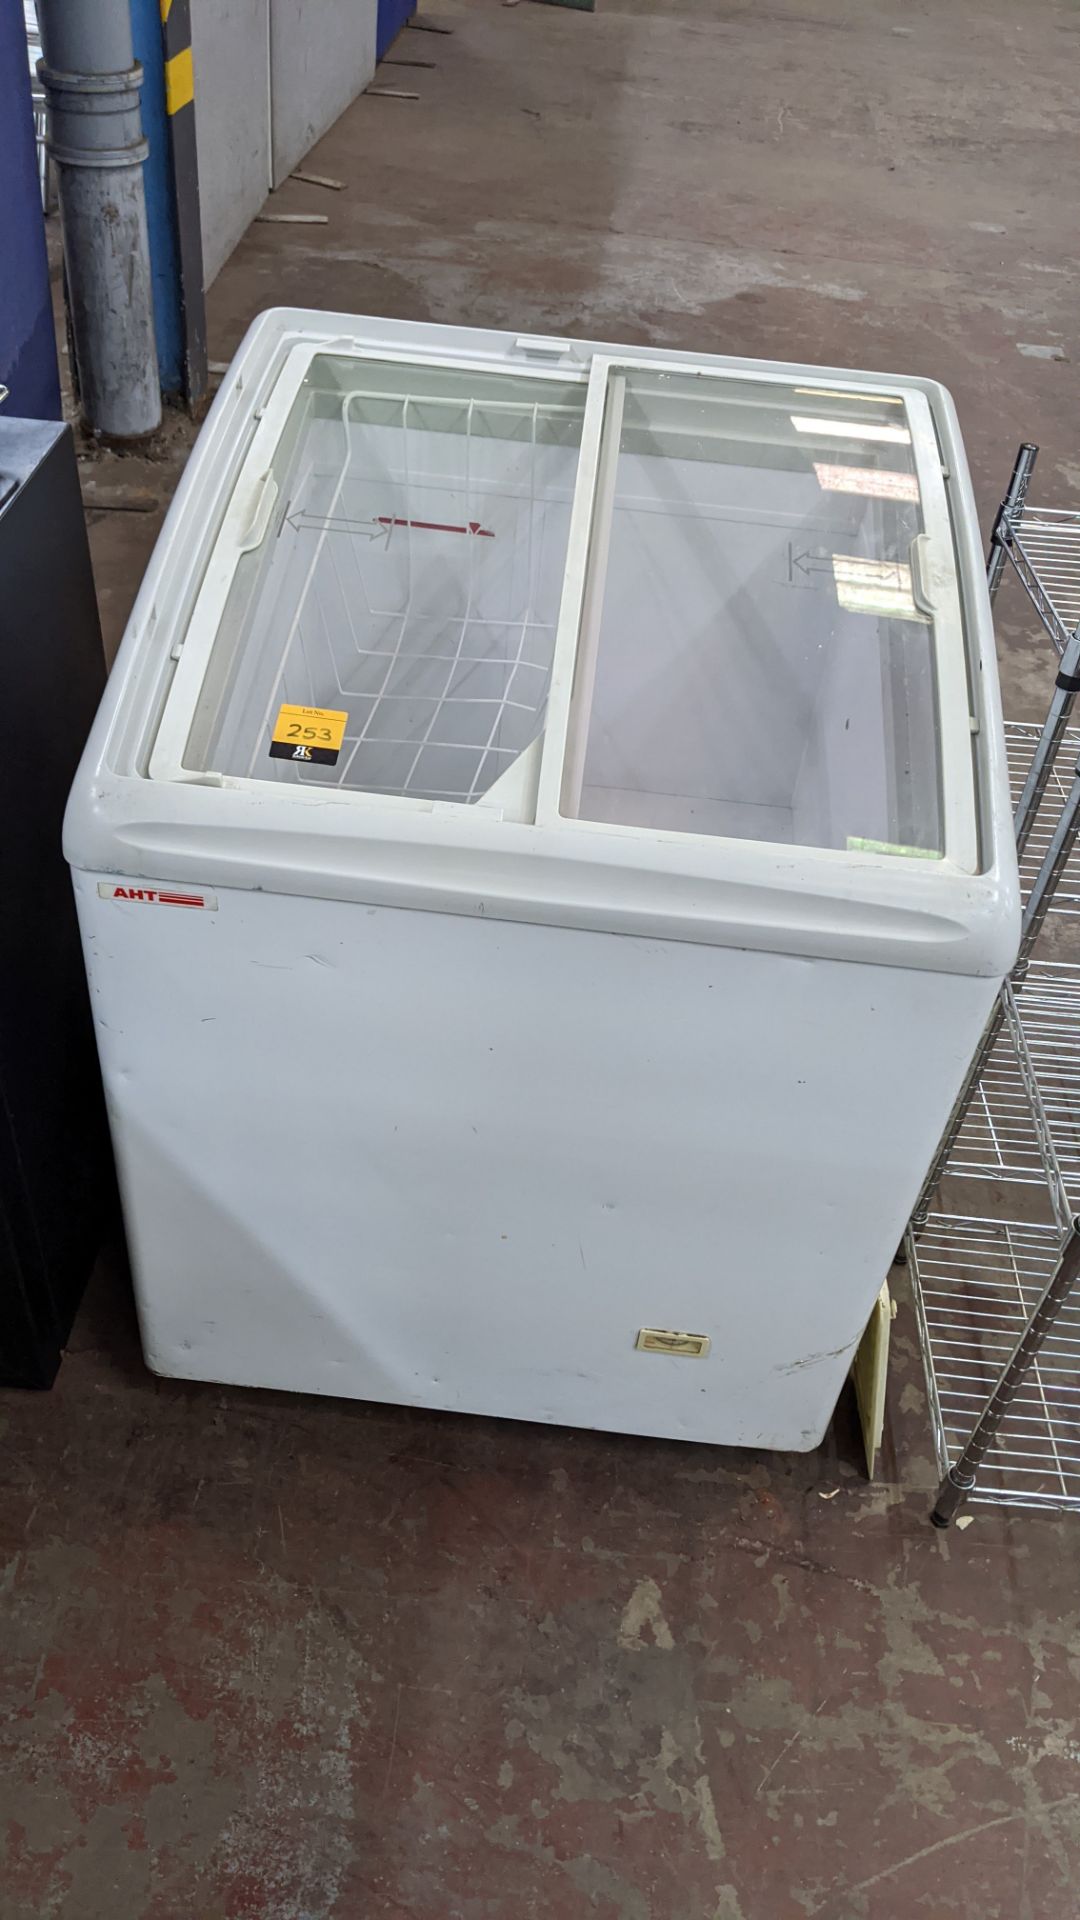 AHT Rio S68 compact chest freezer with sliding clear lid - Image 3 of 5